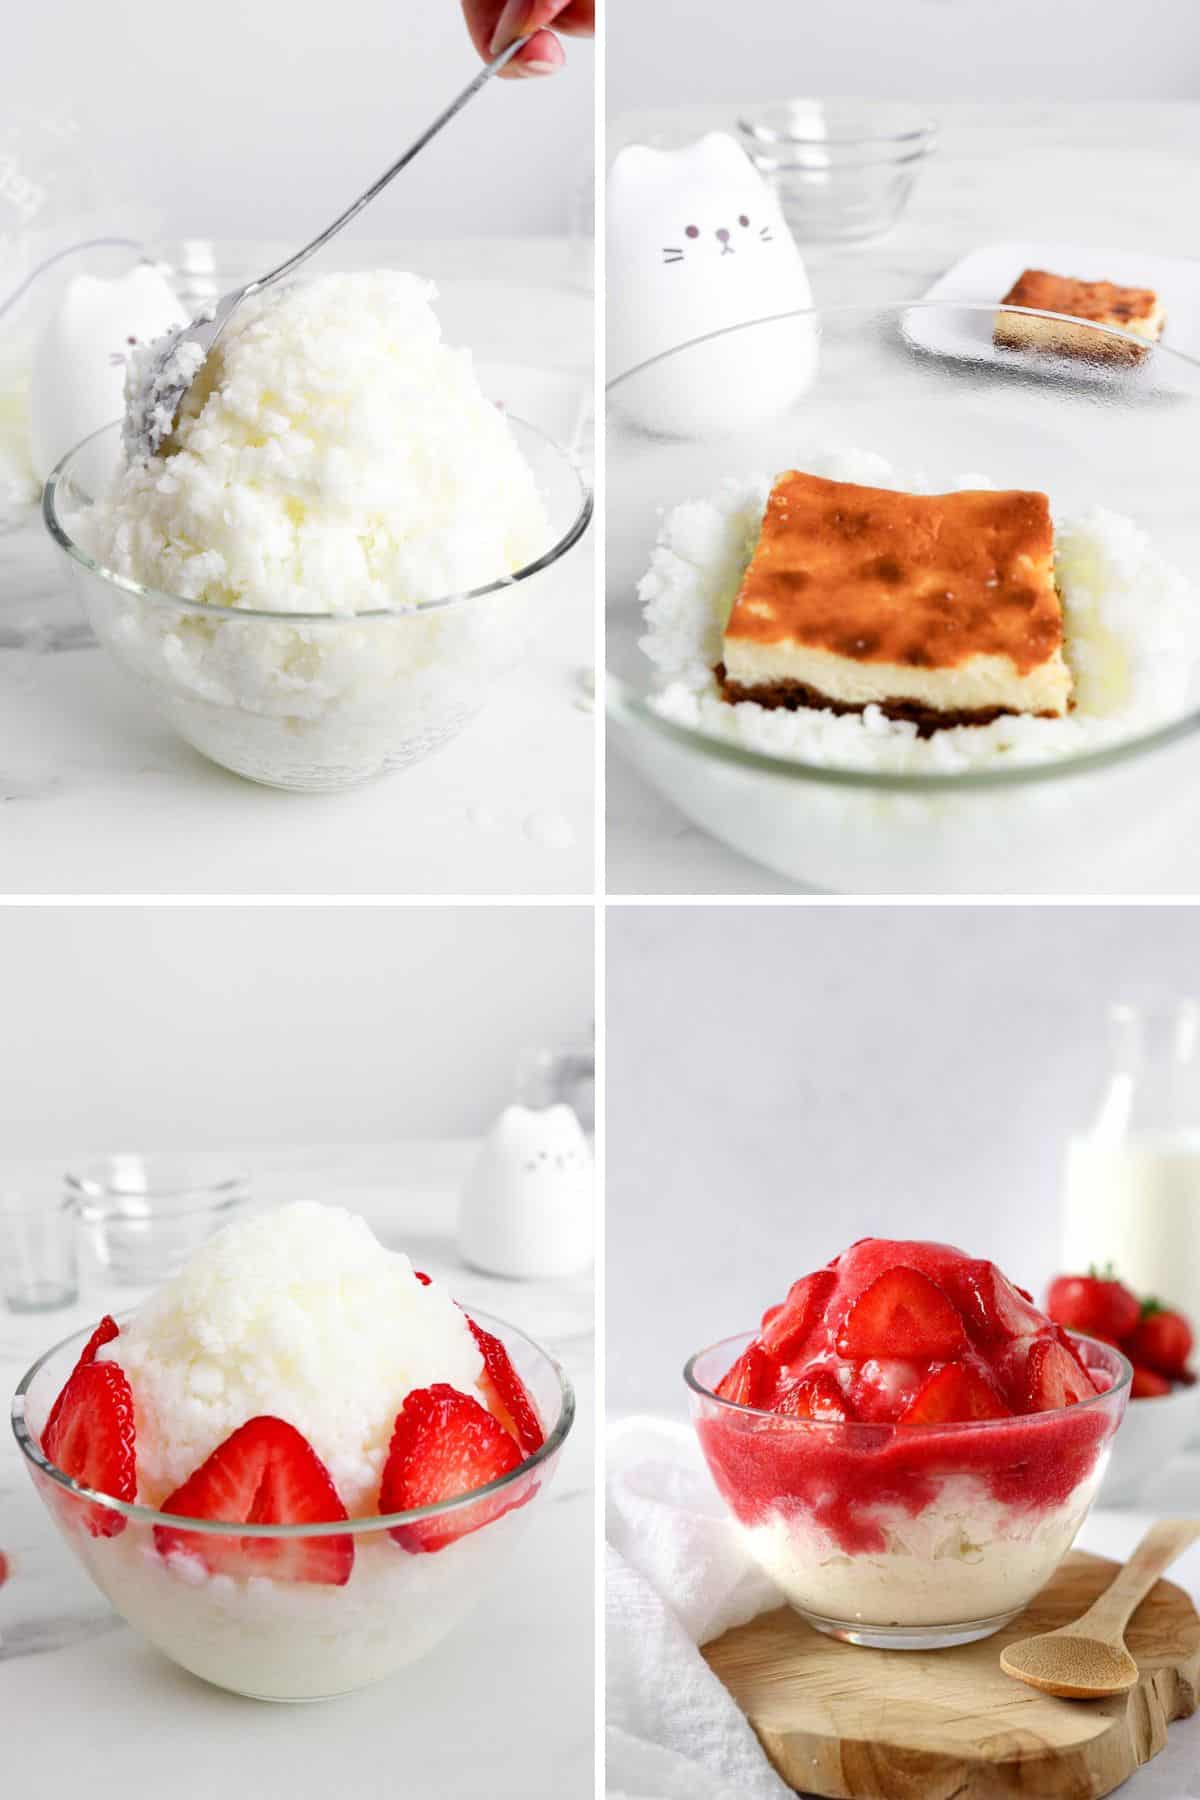 4 photos showing how to assemble a strawberry bingsu